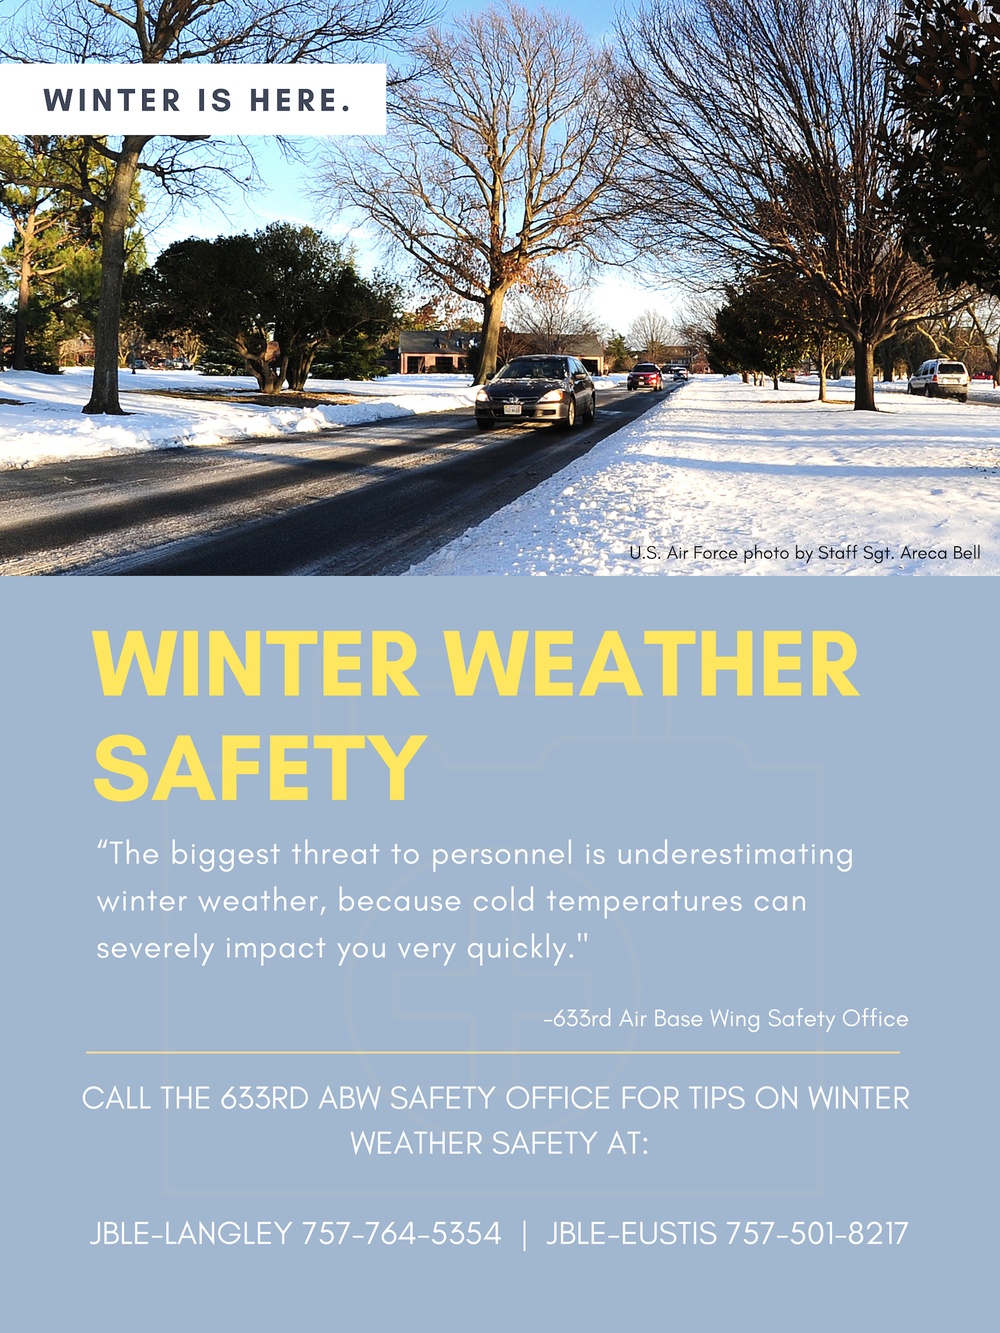 Winter weather safety